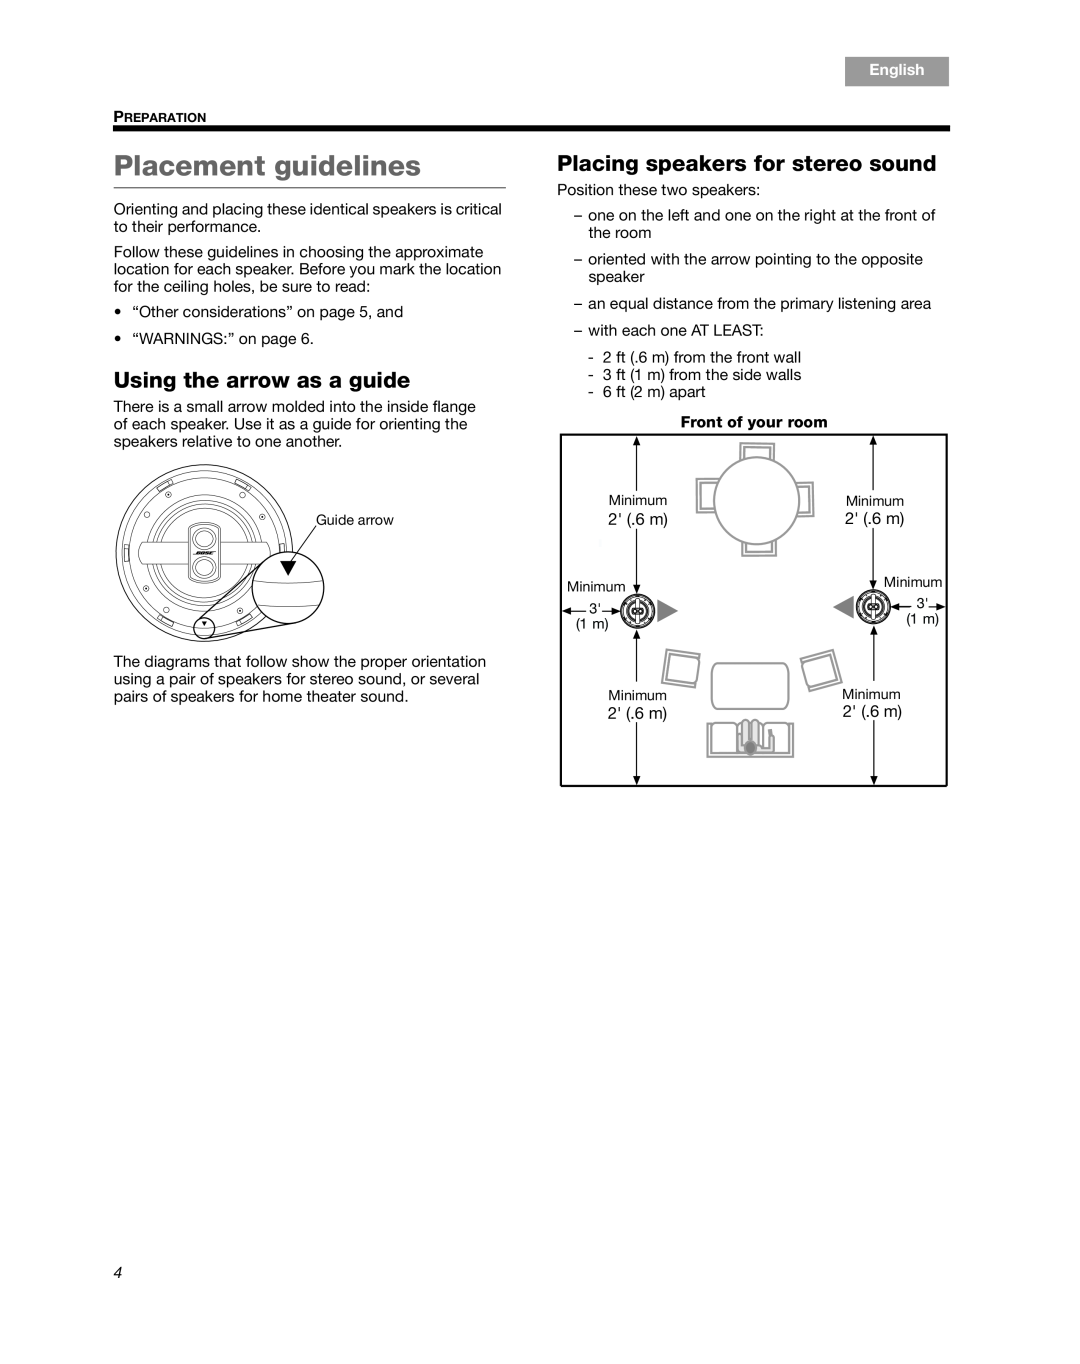 Bose 791 Placement guidelines, Placing speakers for stereo sound, Using the arrow as a guide, 2 .6m, Front of your room 